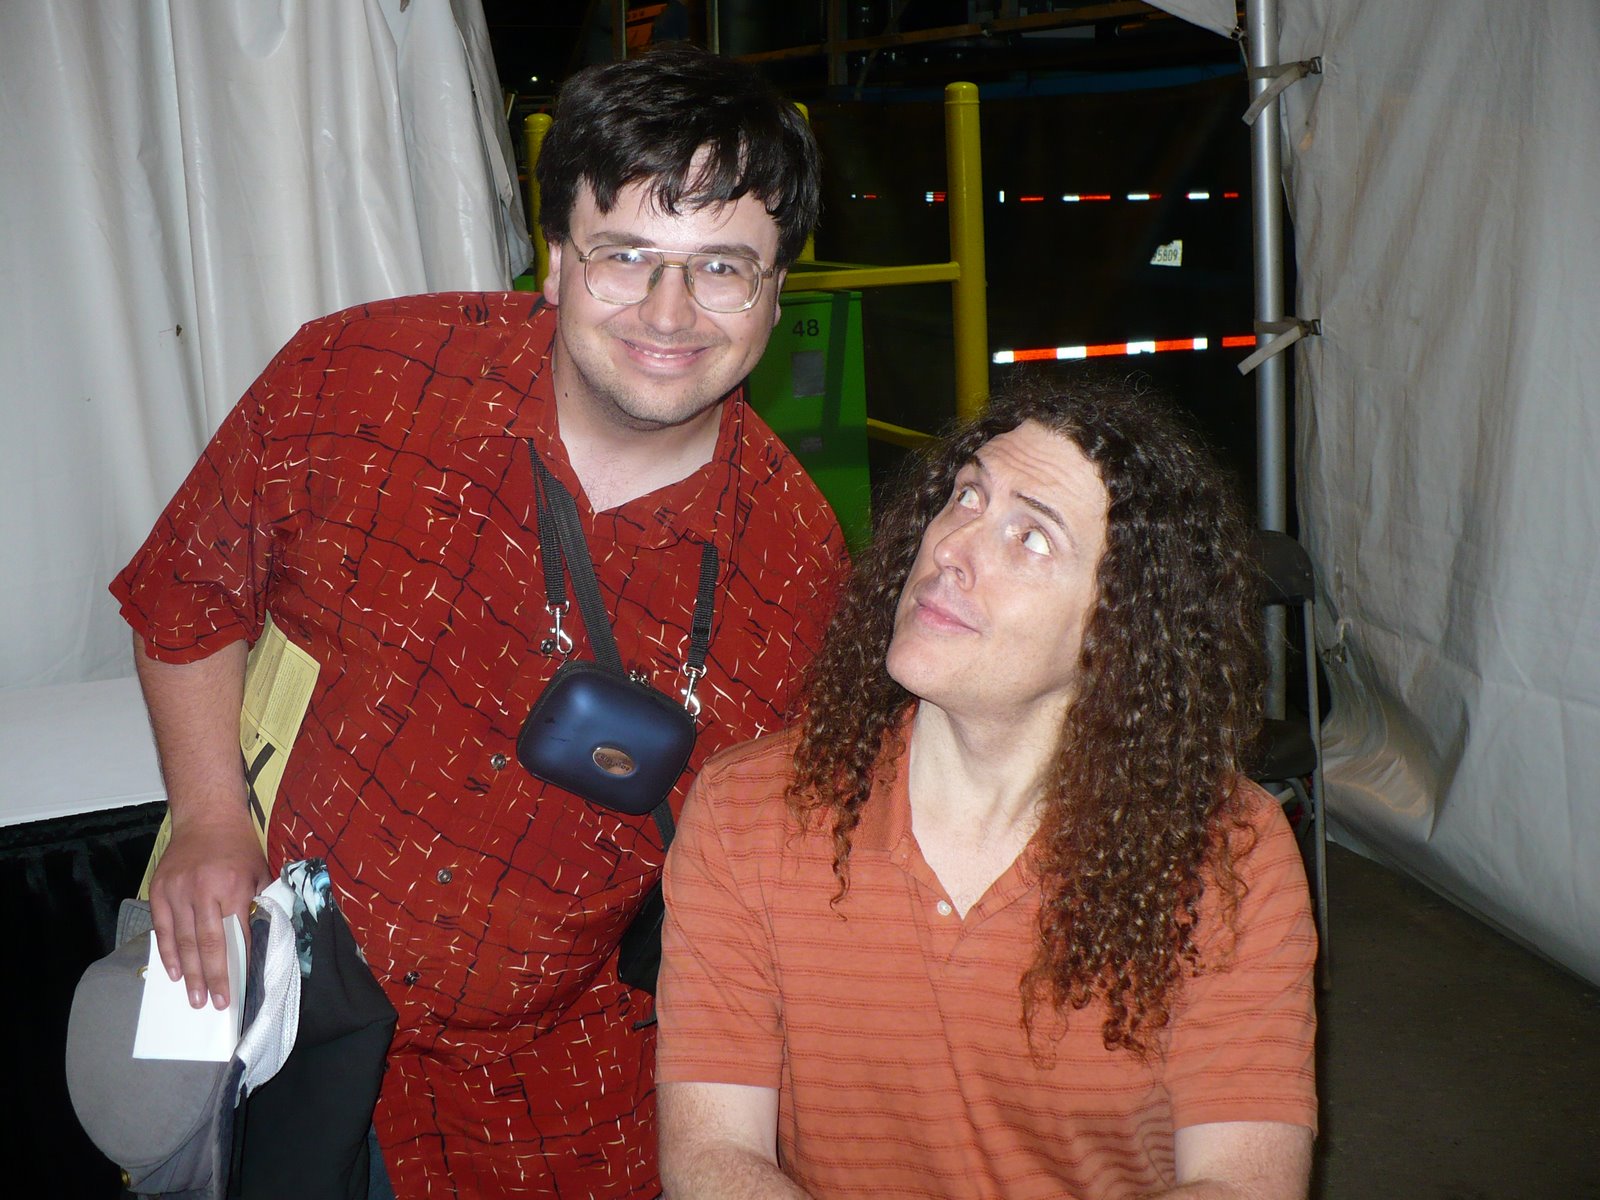 That magical day when I met "Weird Al" Yankovic at the Capital X in 2007.